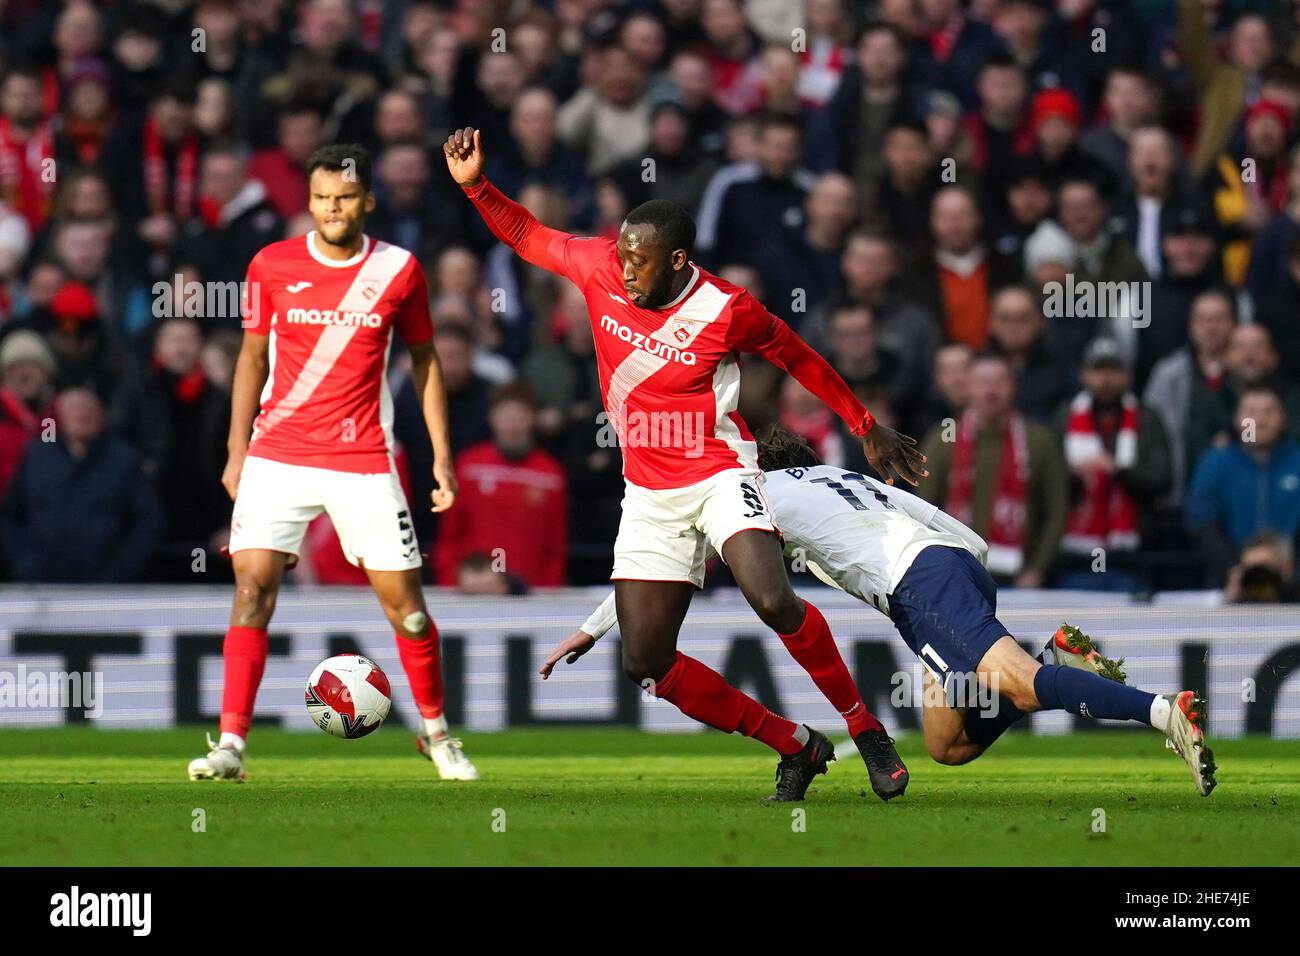 Morcambe's Toumani Diagouraga (centre) and Tottenham Hotspur's Bryan Gil Salvatierra (right) battle for the ball during the Emirates FA Cup third round match at Tottenham Hotspur Stadium, London. Picture date: Sunday January 9, 2022. Stock Photo